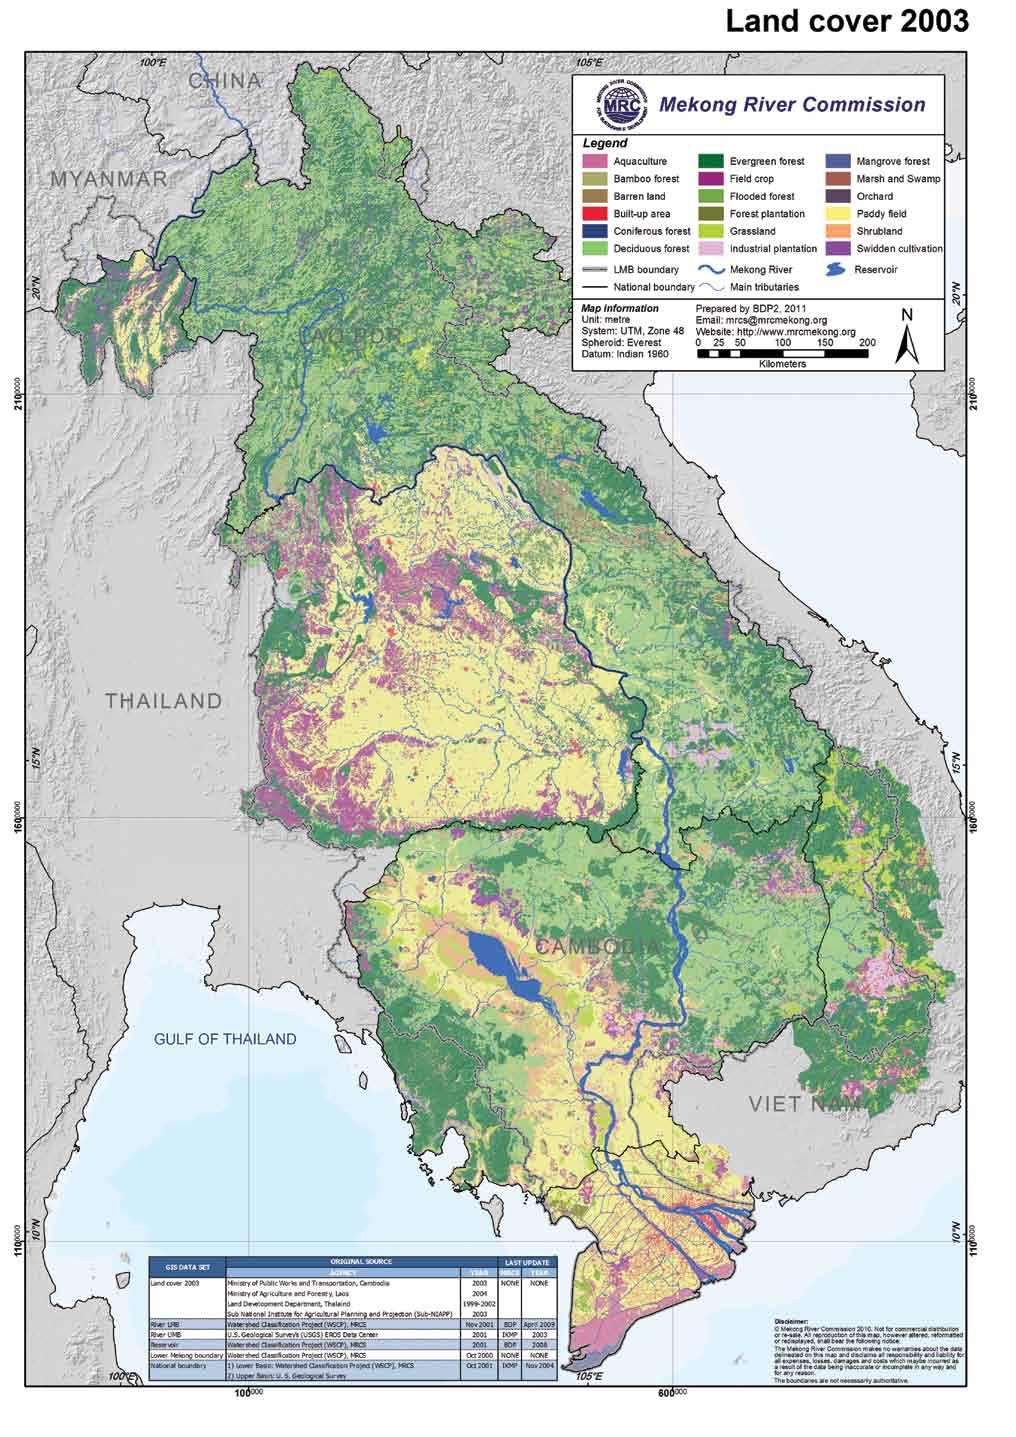 42 Planning Atlas of the Lower Mekong River